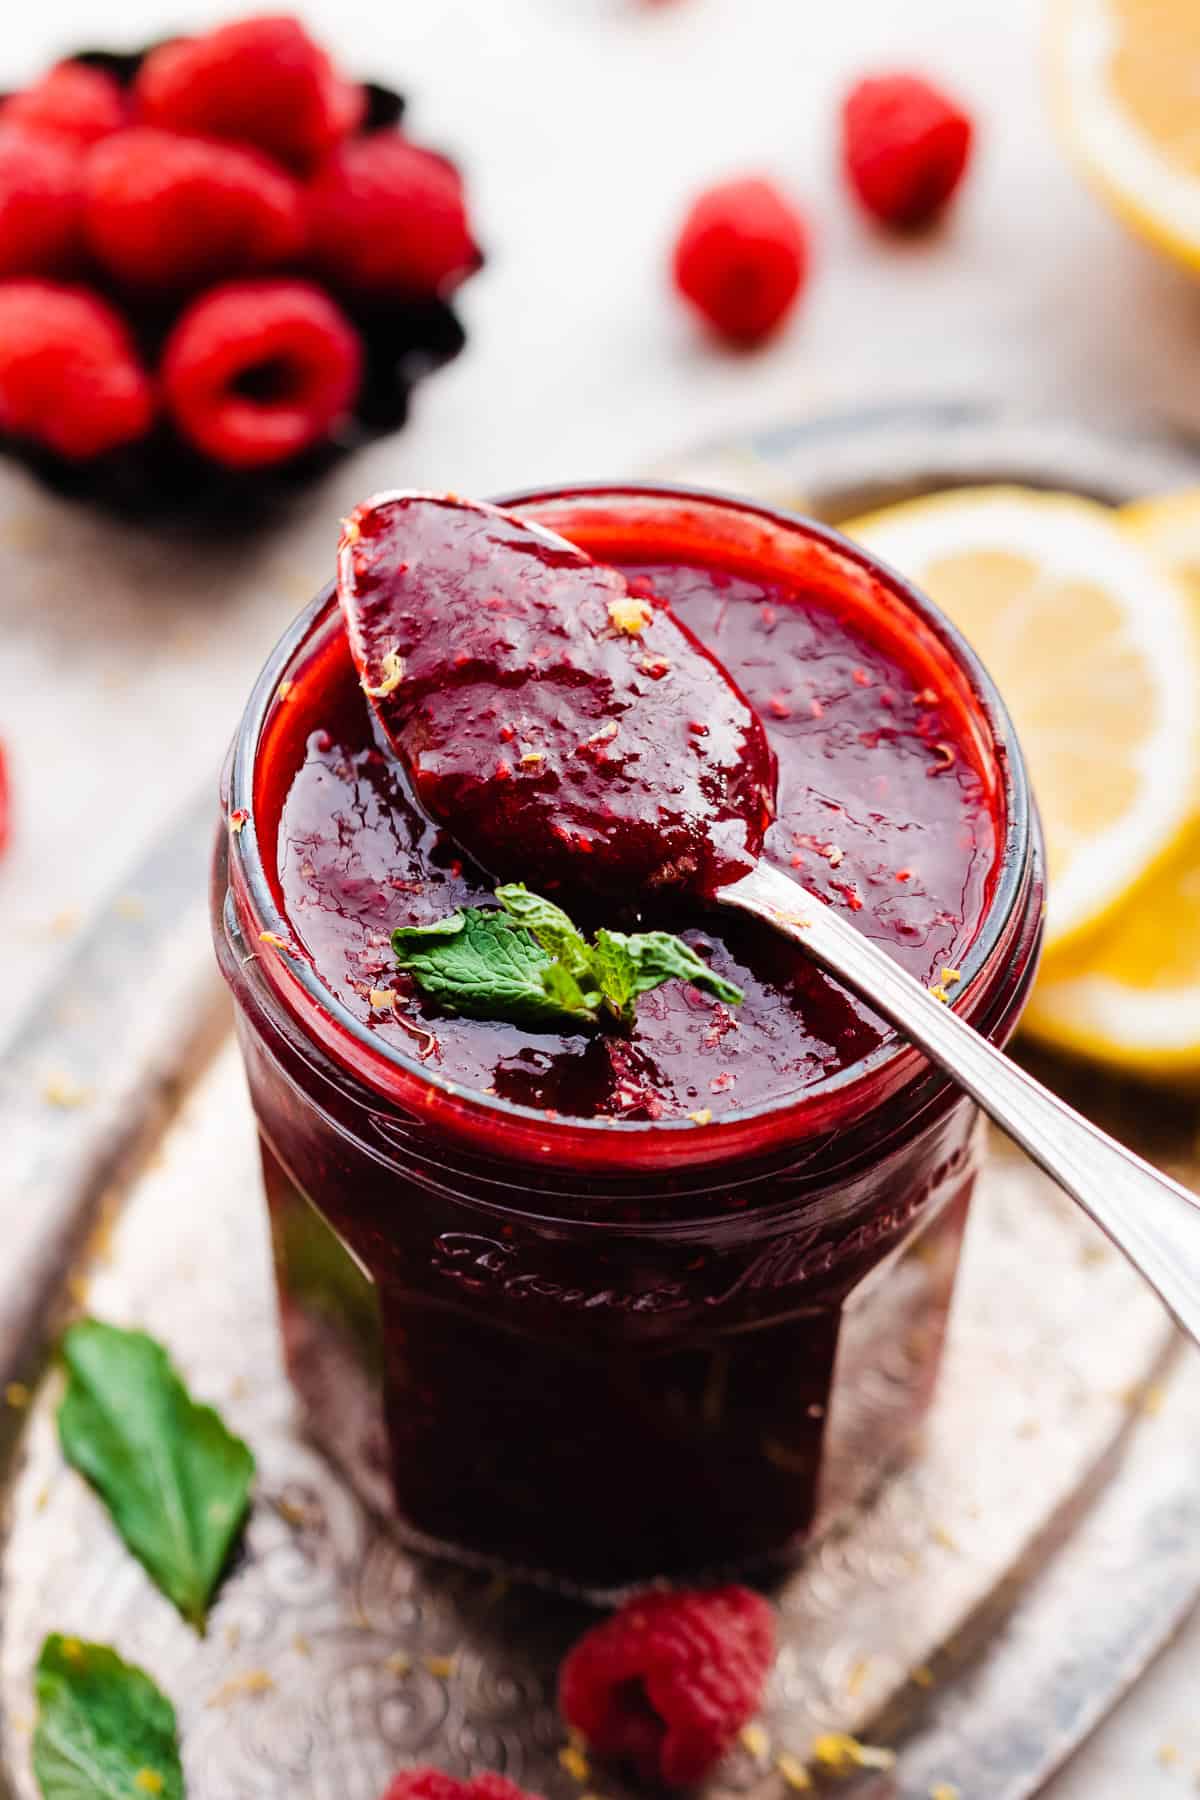 A spoonful of raspberry sauce resting on a jar full.